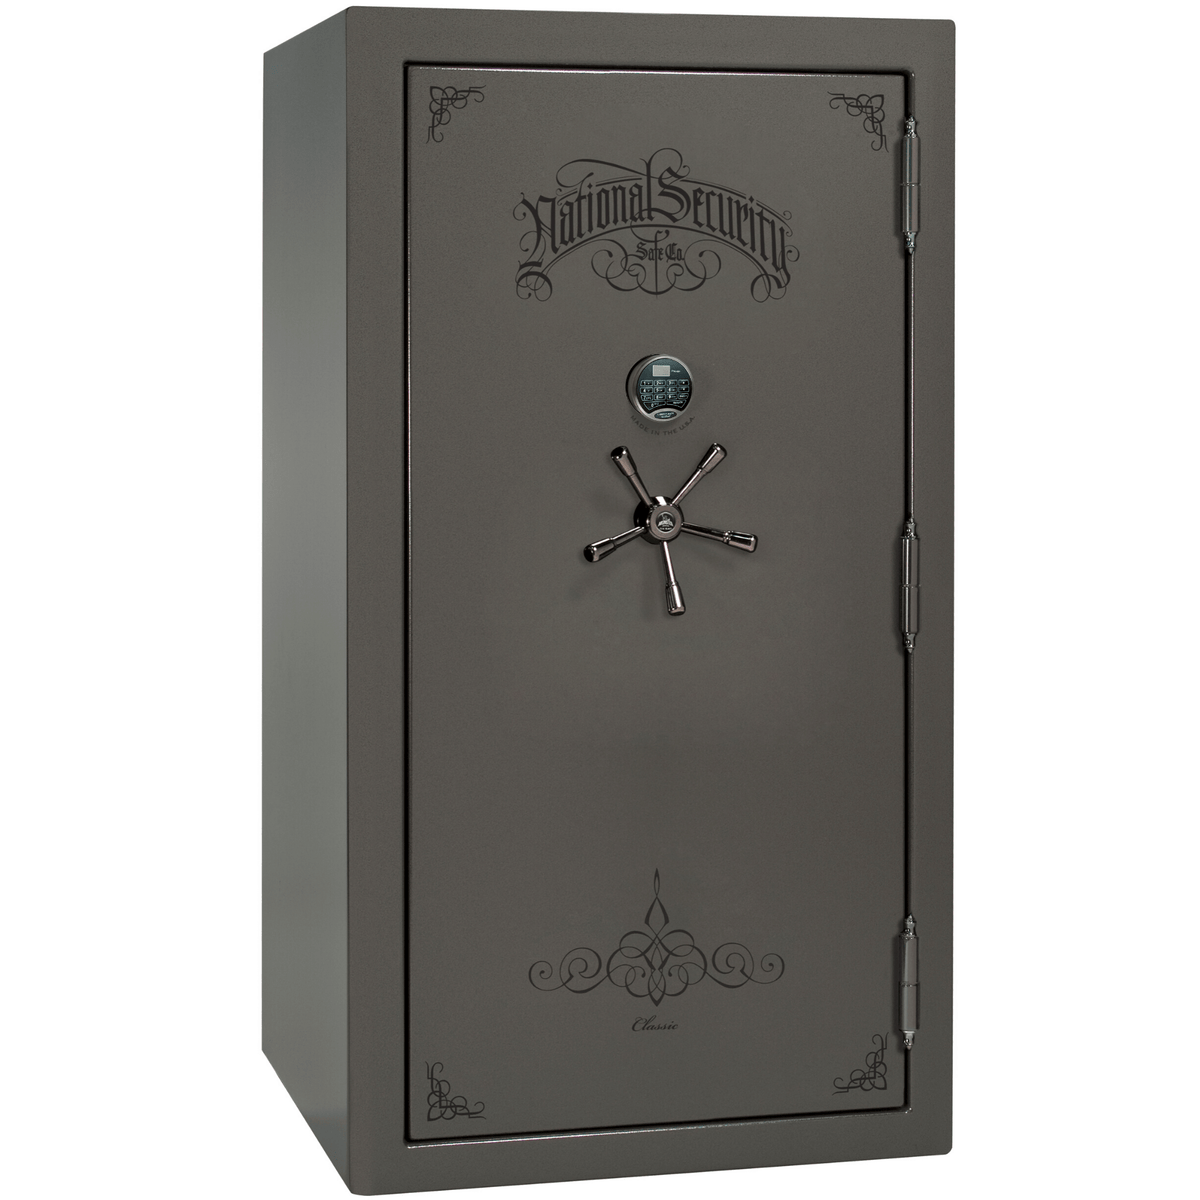 Classic Plus Series | Level 7 Security | 110 Minute Fire Protection | Liberty Safe Norcal.